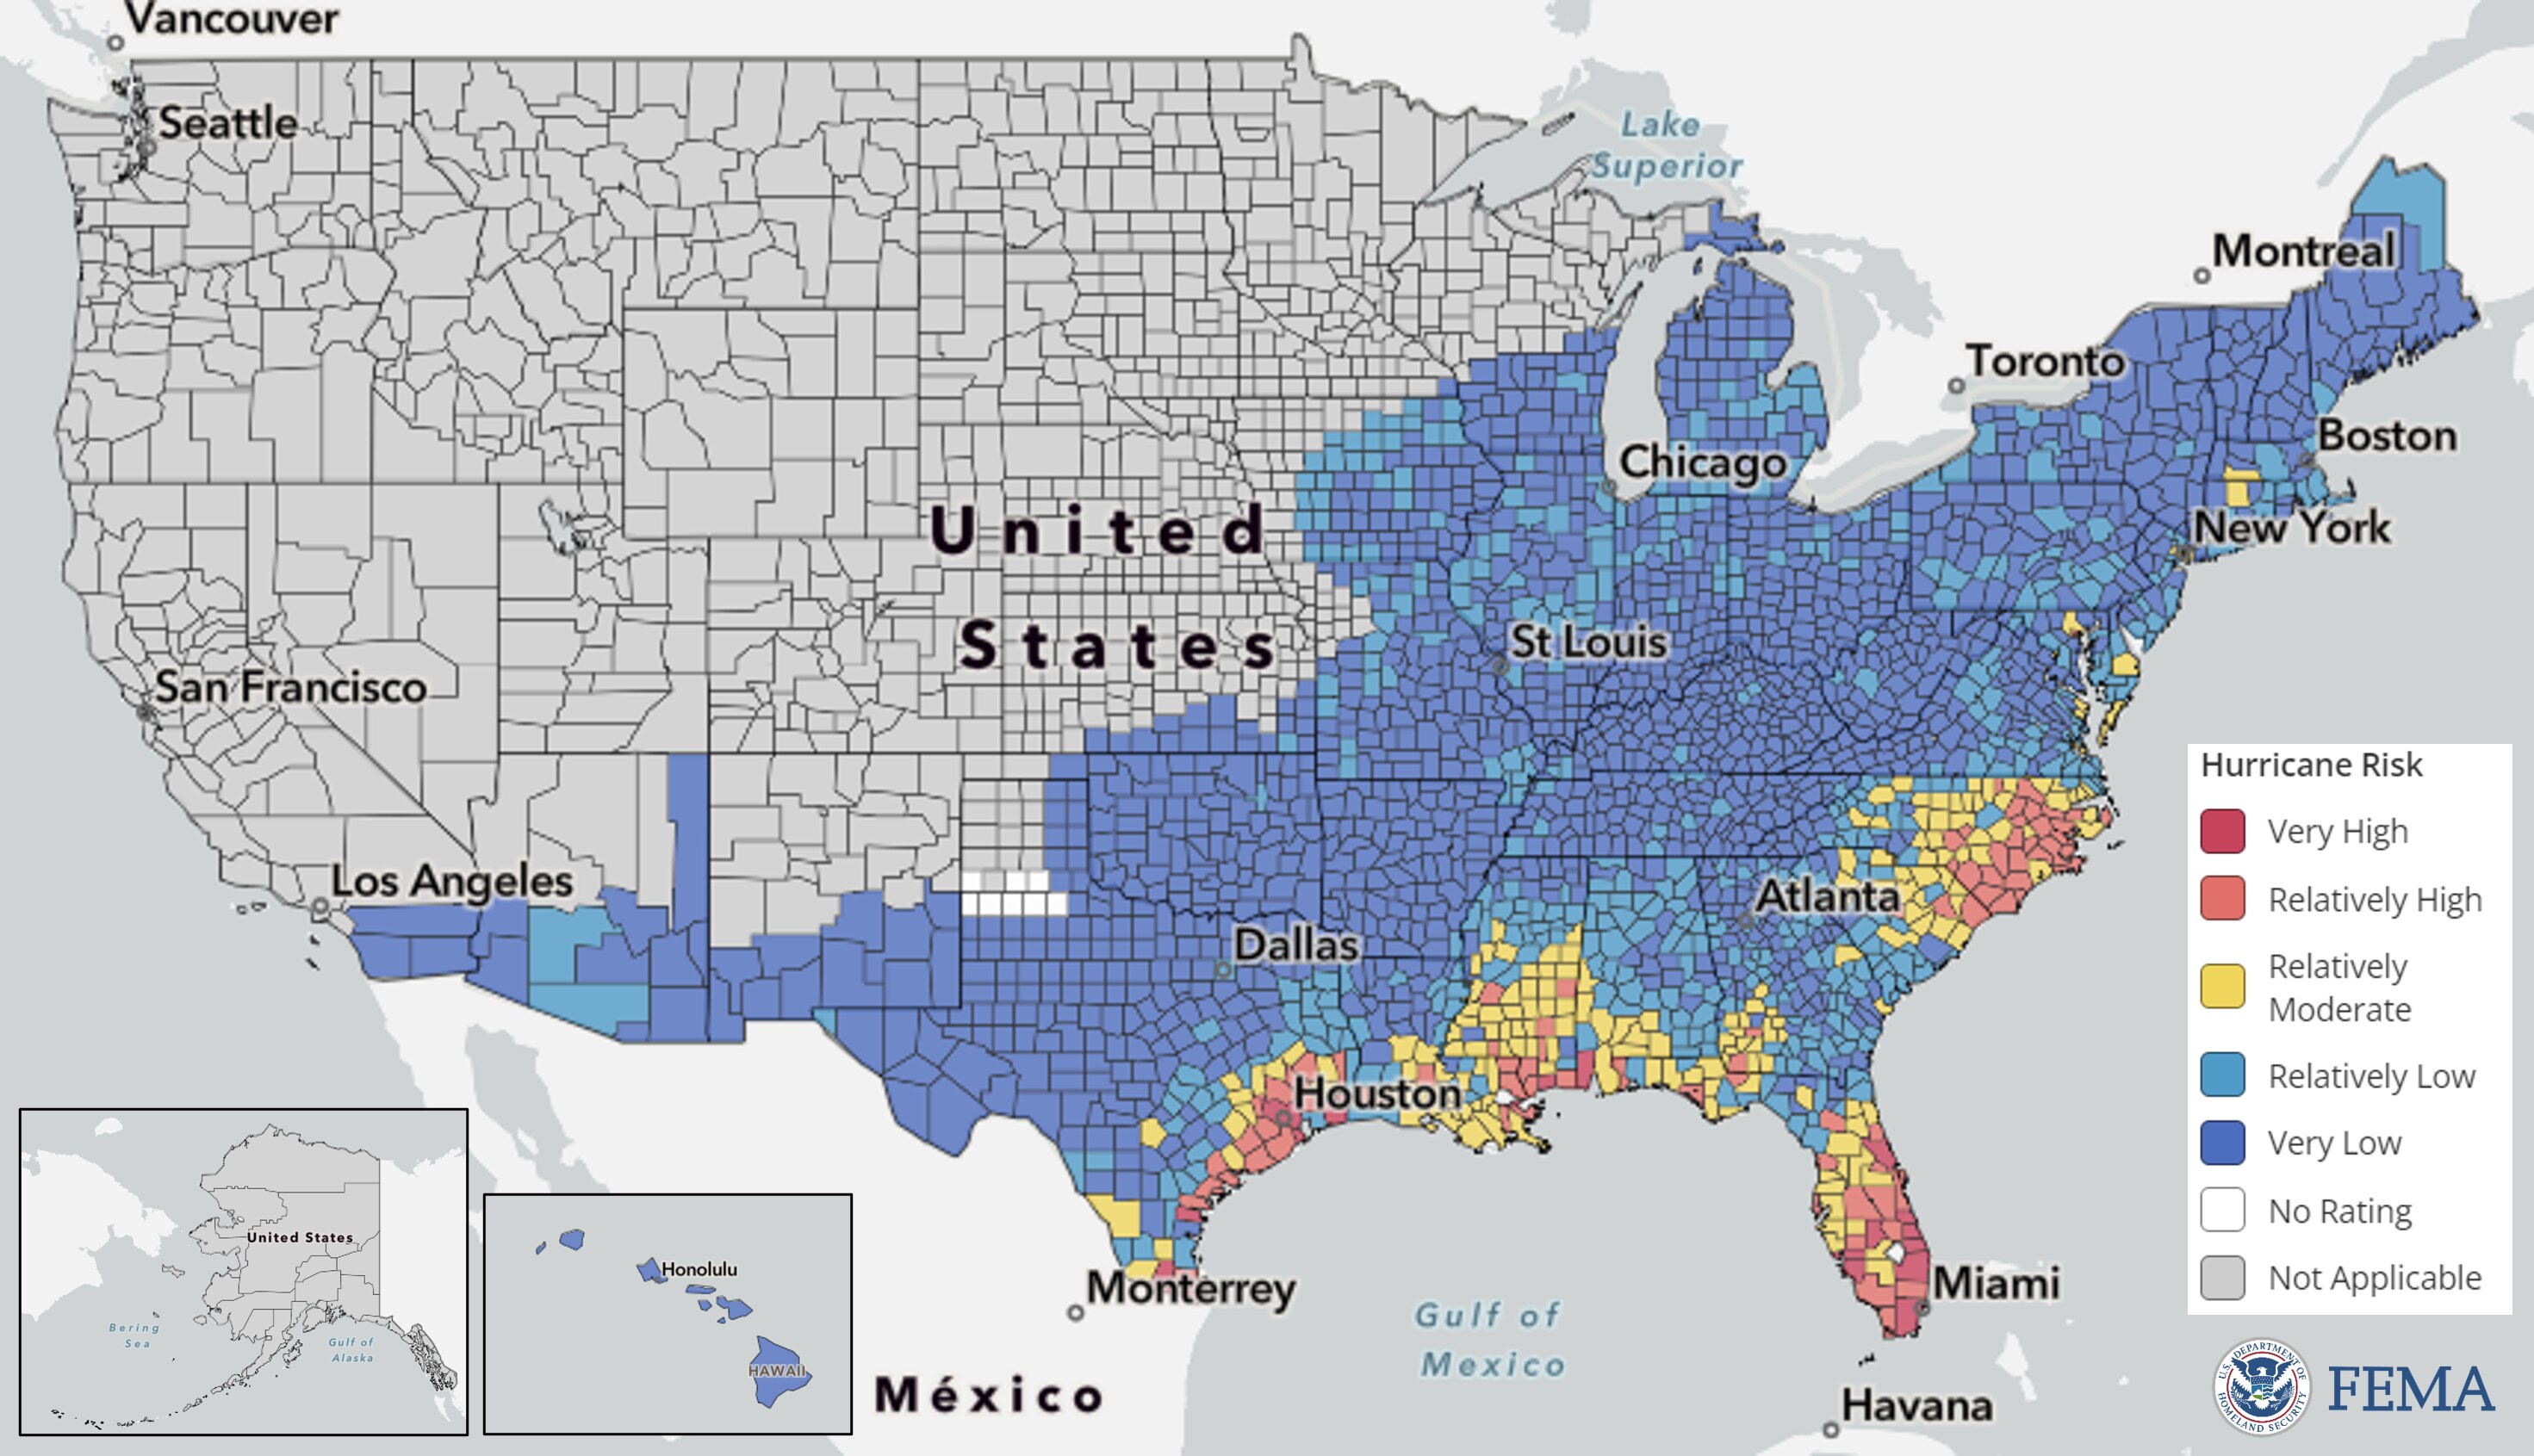 Map of the United States is colored by the relative Risk Index rating for the Hurricane hazard. The characterization of risk across these counties are based on historical records on hurricane paths and intensity